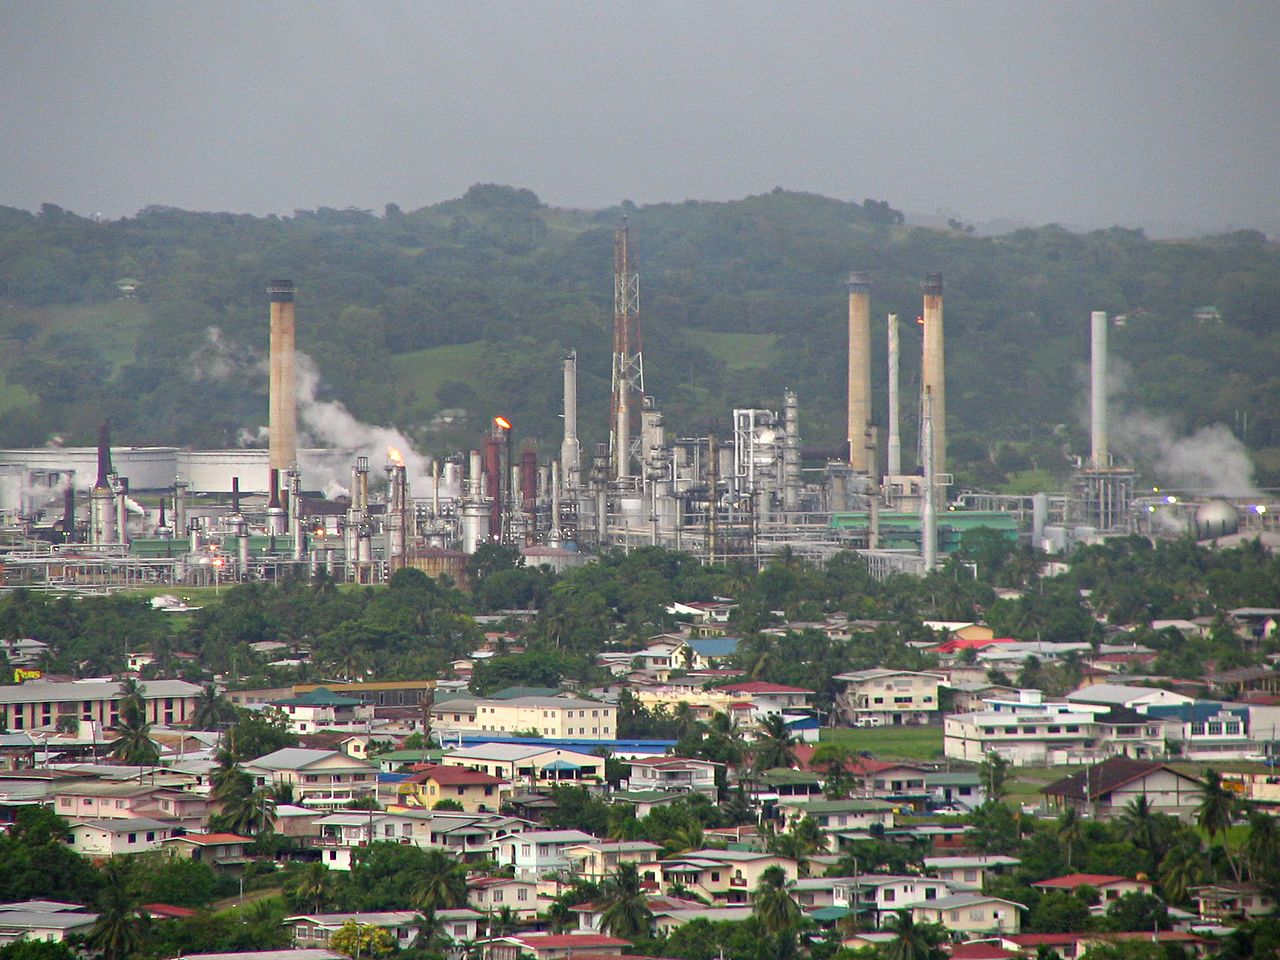 Trinidad and Tobago in talks to sell idled refinery to Quanten